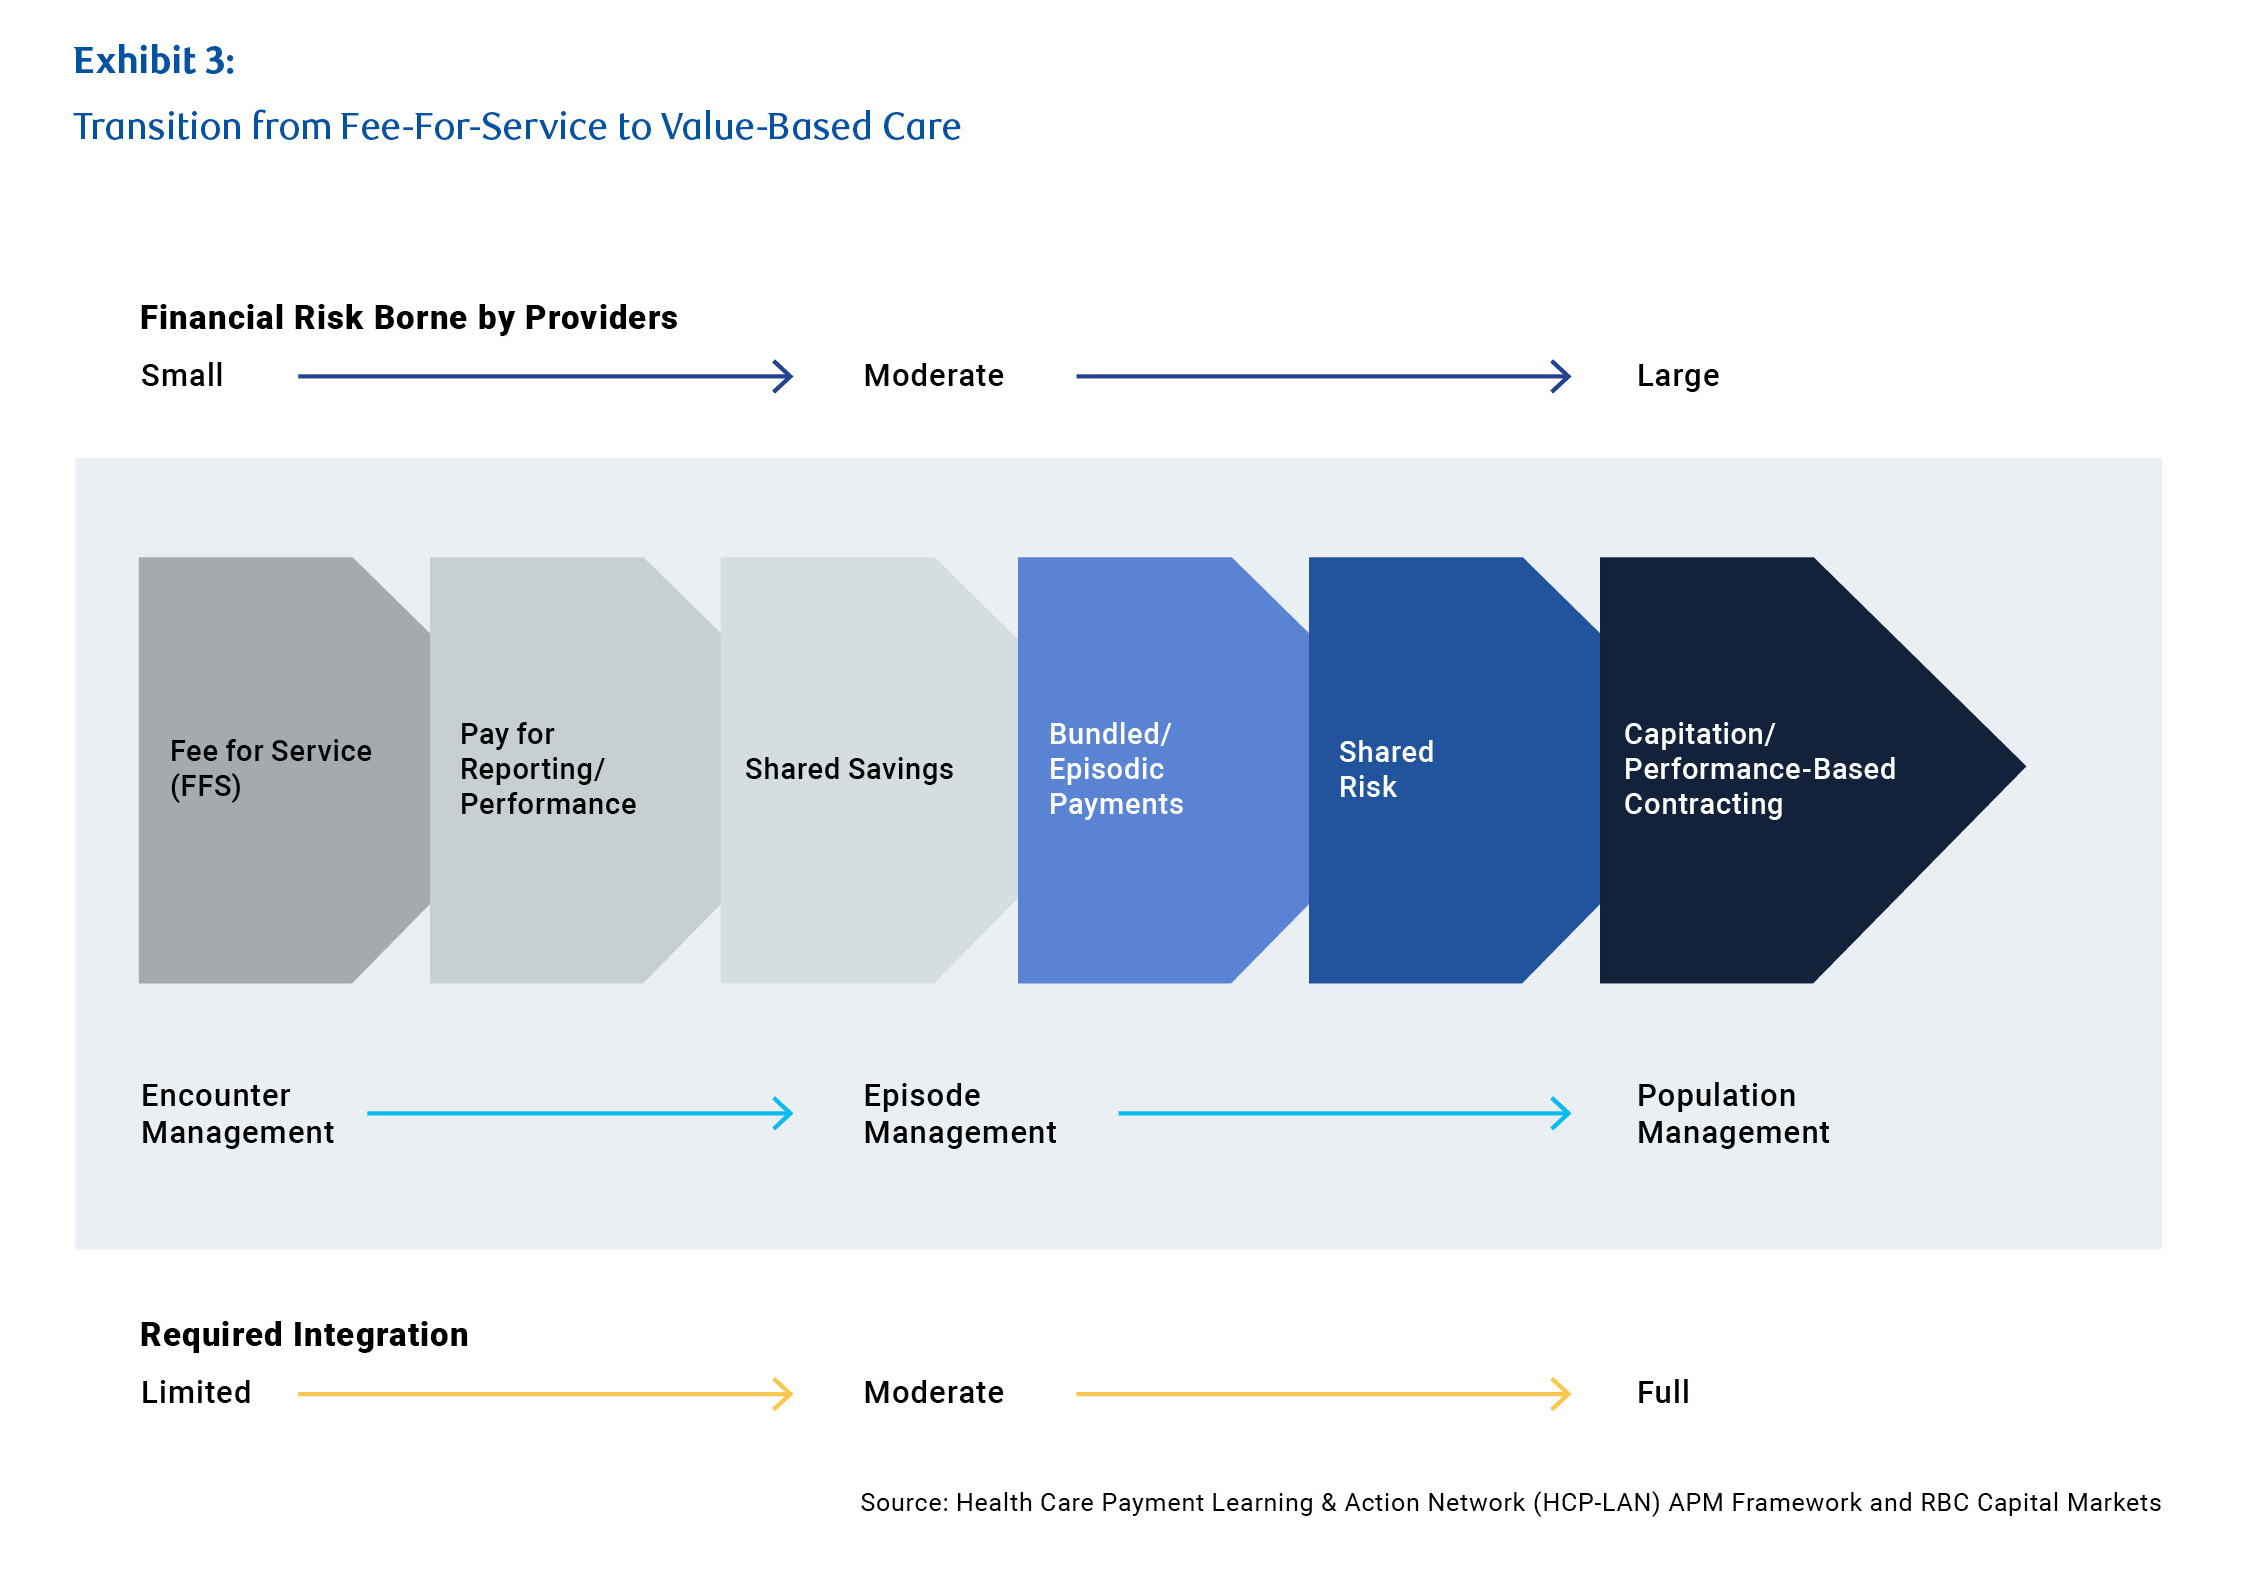 Transition from Free-For-Service to Value-Based Care